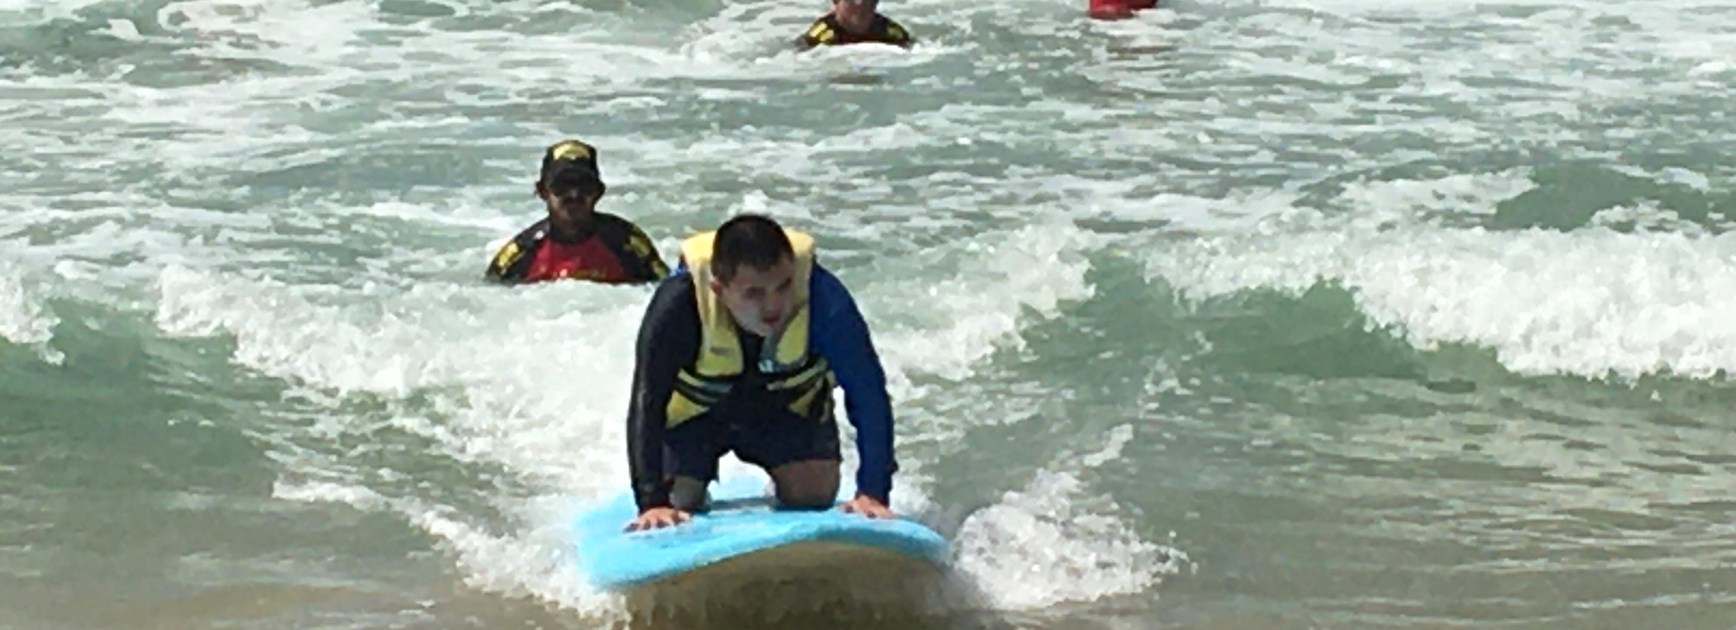 ‘Little Miracles’ in the waves - Sharks support Surfers Healing